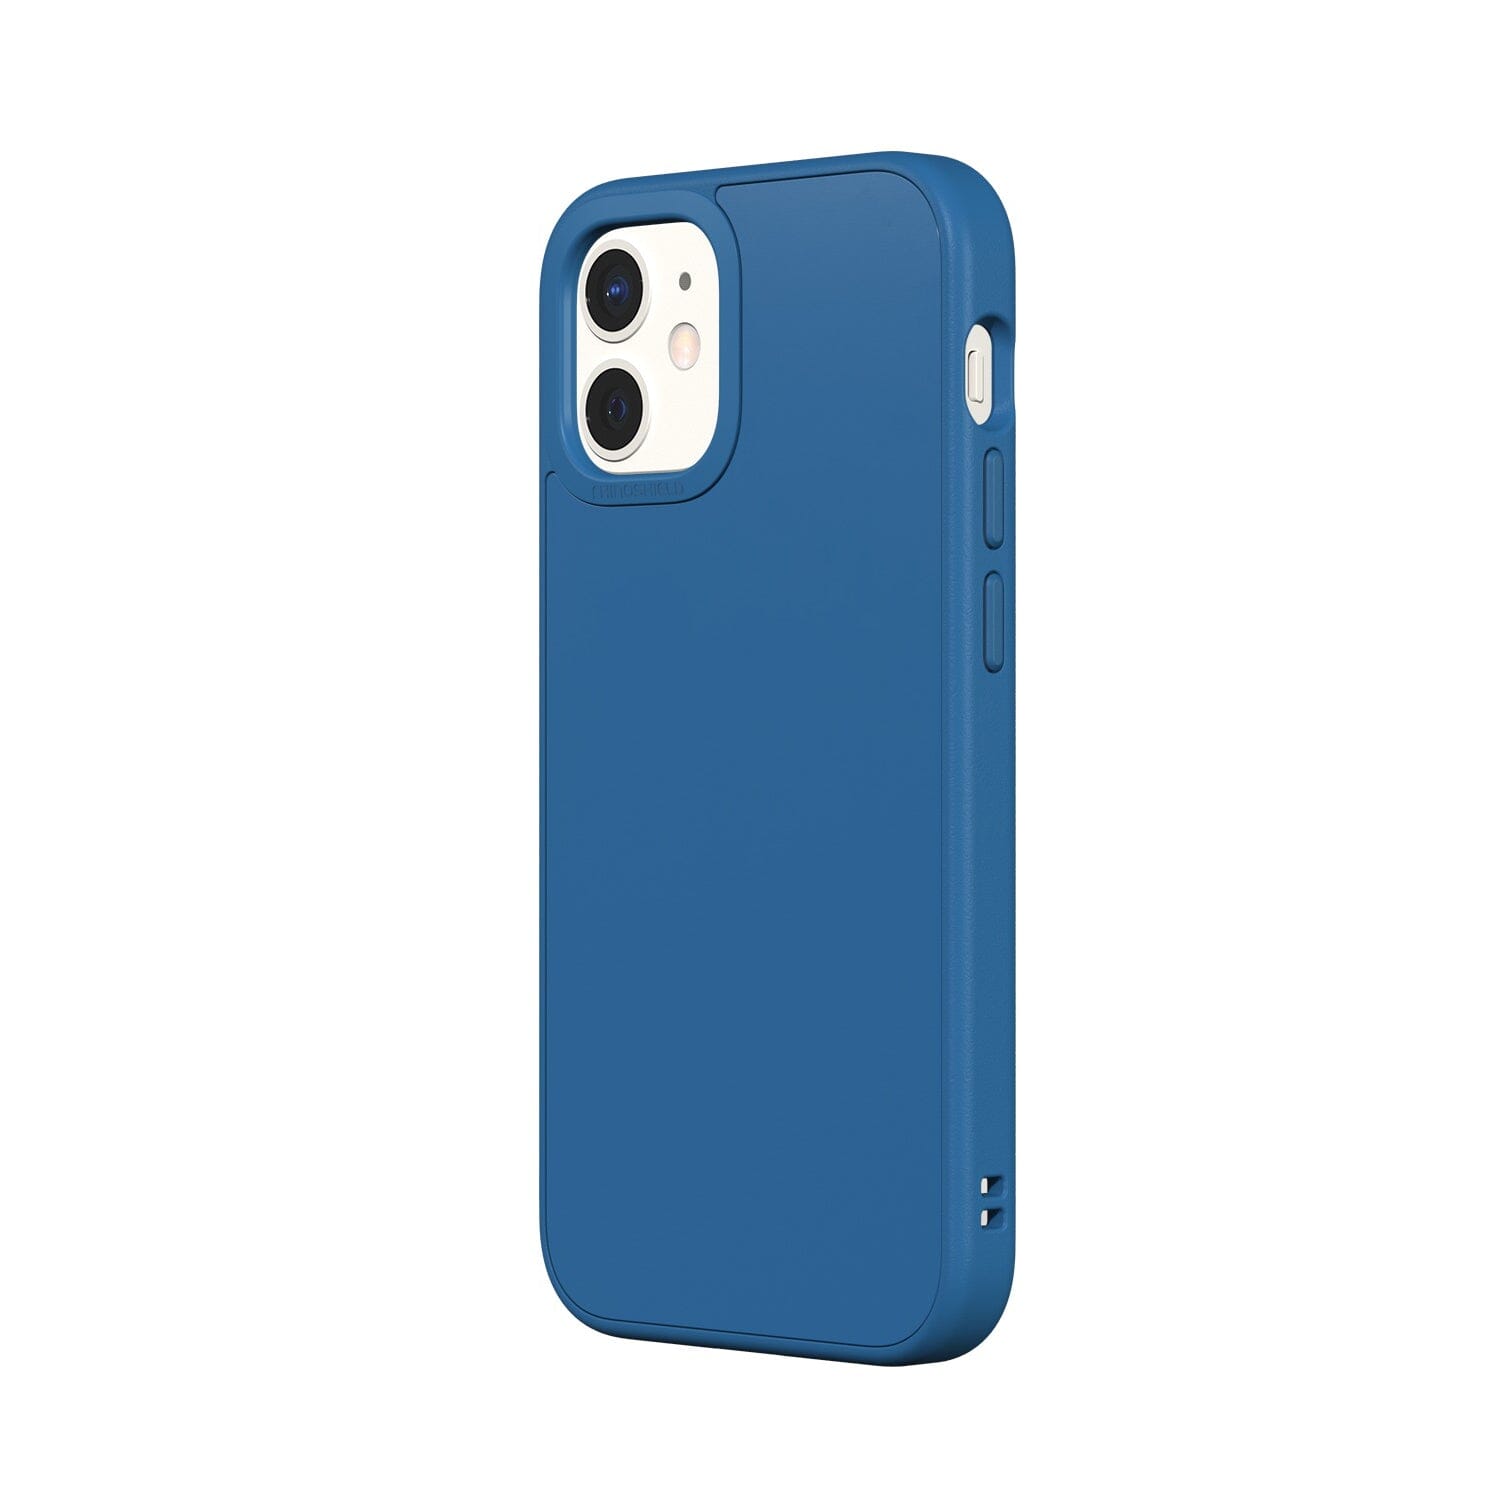 RhinoShield SolidSuit Protective Case with Premium Finish for iPhone 12 Series (2020) iPhone 12 Series RhinoShield iPhone 12 mini 5.4" Classic Royal Blue 